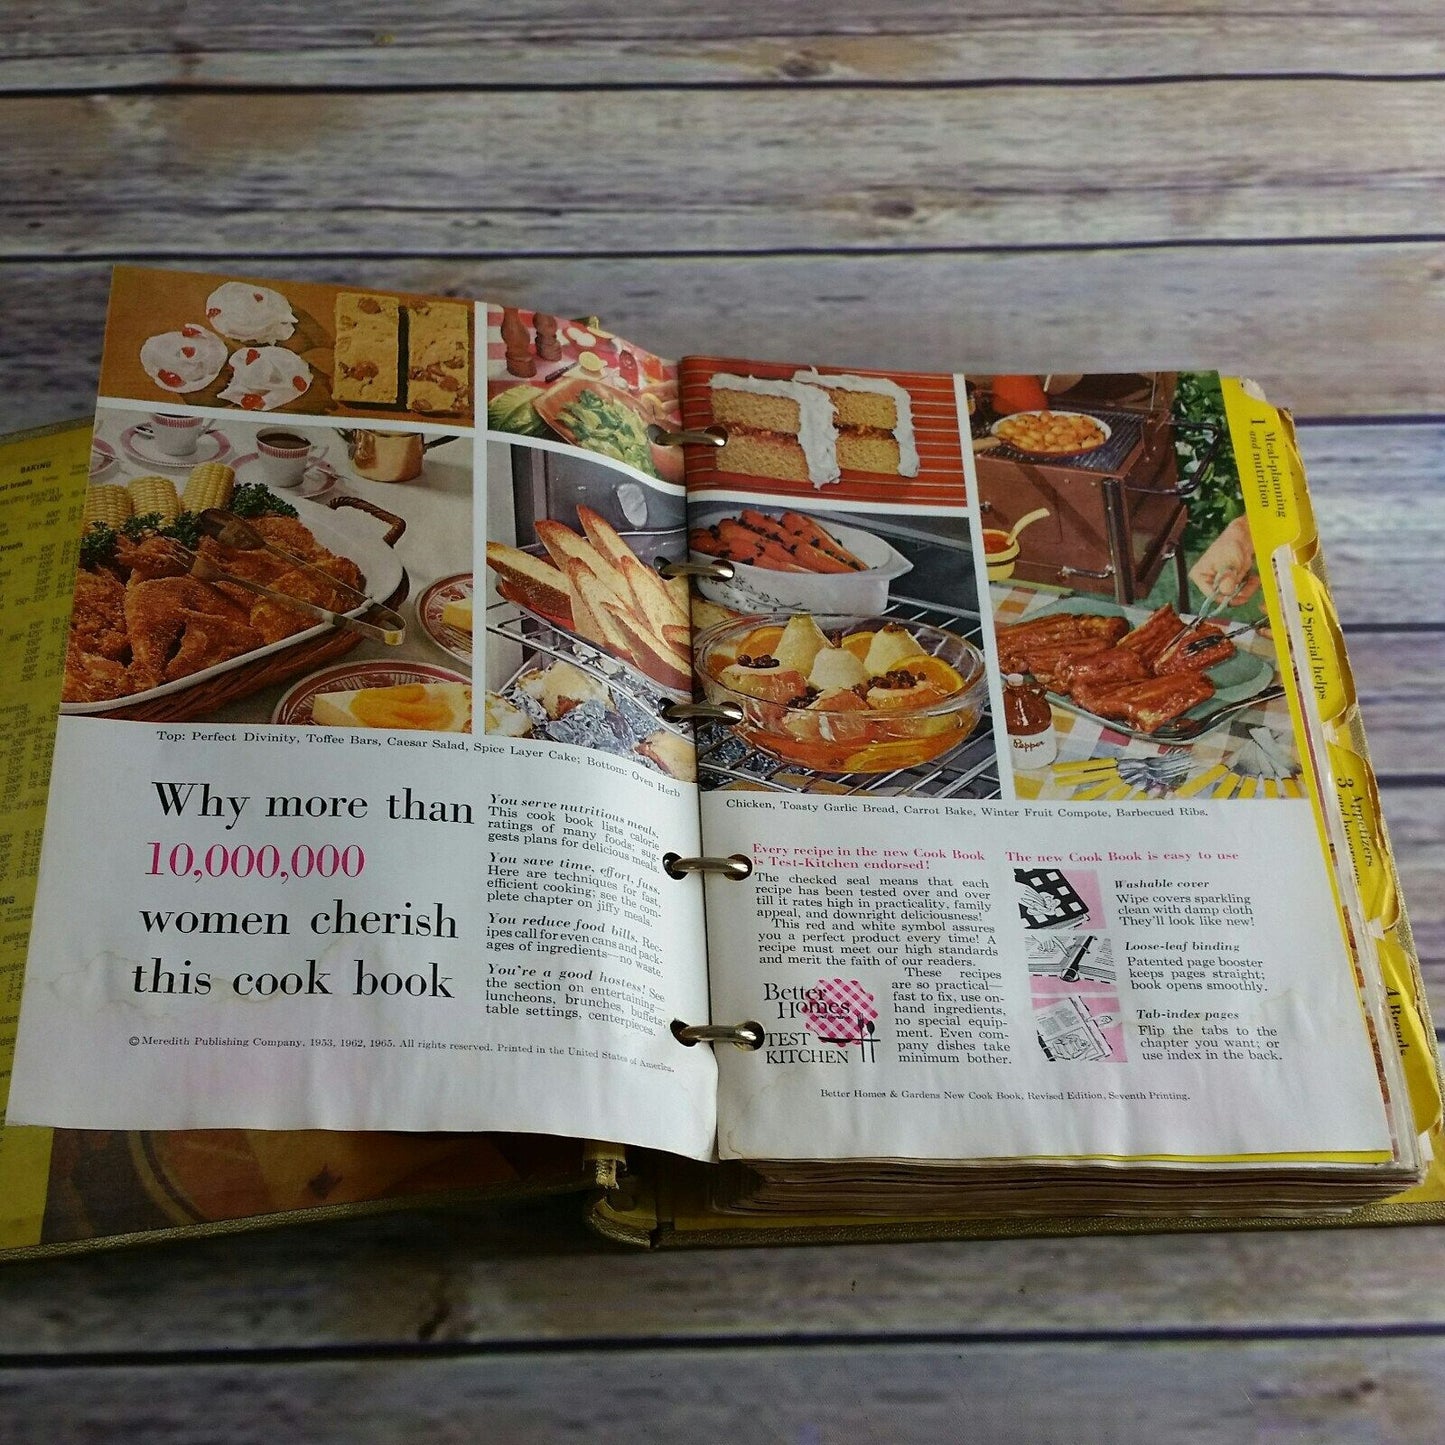 Vintage Better Homes and Gardens New Cookbook Recipes 5 Ring Binder 1965 Hardcover 1960s Gold Cover Souvenir Edition Commemoration